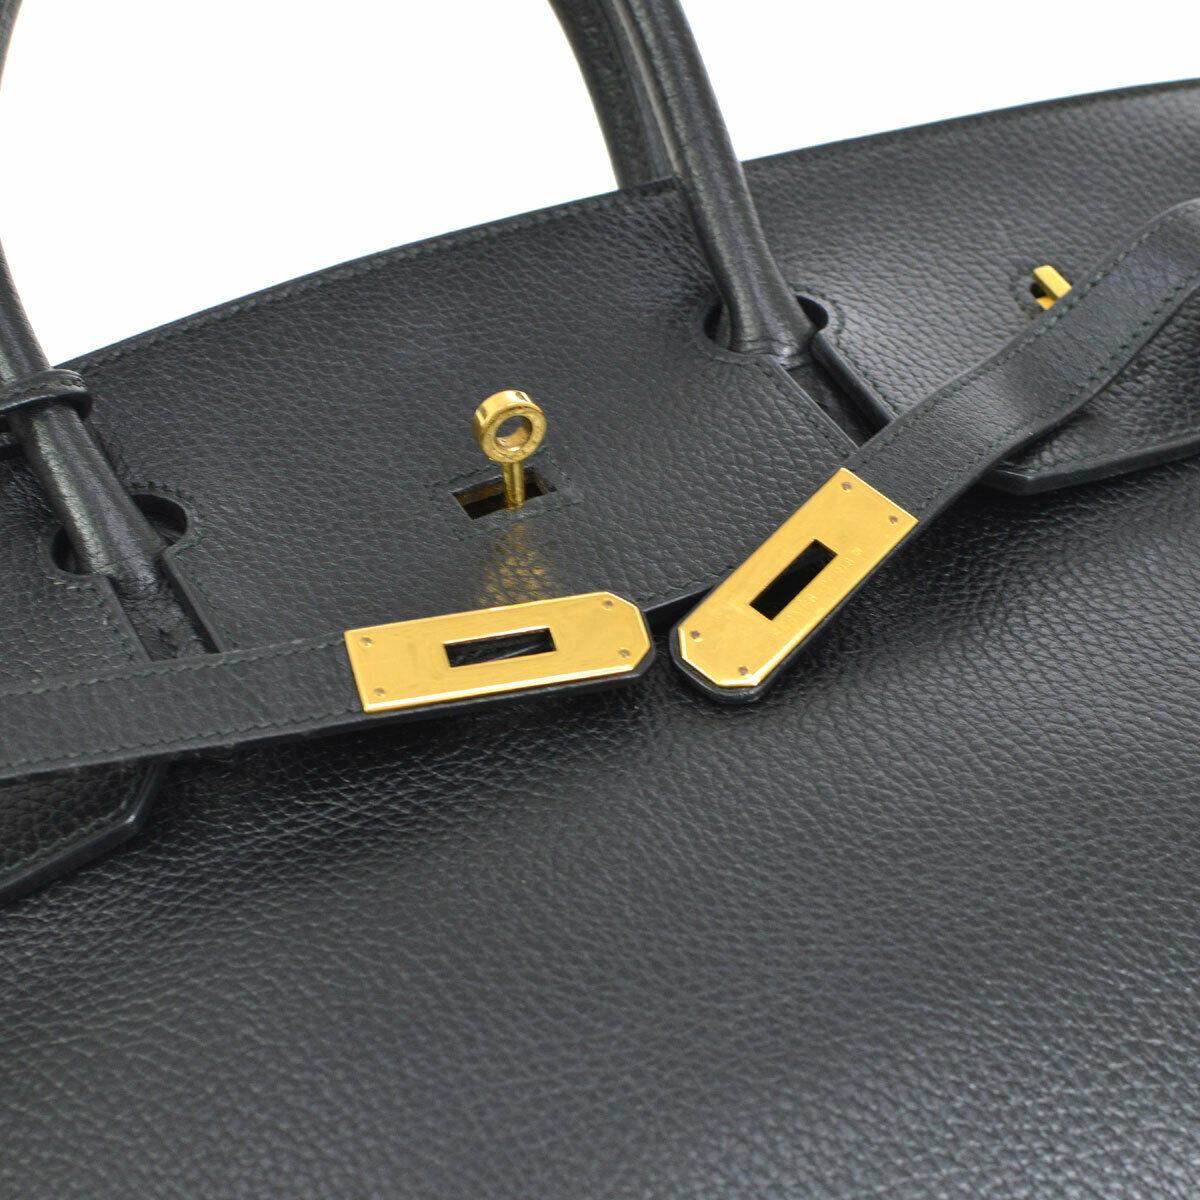 The All-Purpose Hermes Birkin You Need.  

The motherlode of Hermes Birkin bags, this chic and smart Hermes Birkin 40 is the epitome of a lifestyle accessory.  Handcrafted of supple leather and enriched with shiny gold tone hardware, it is ideal for